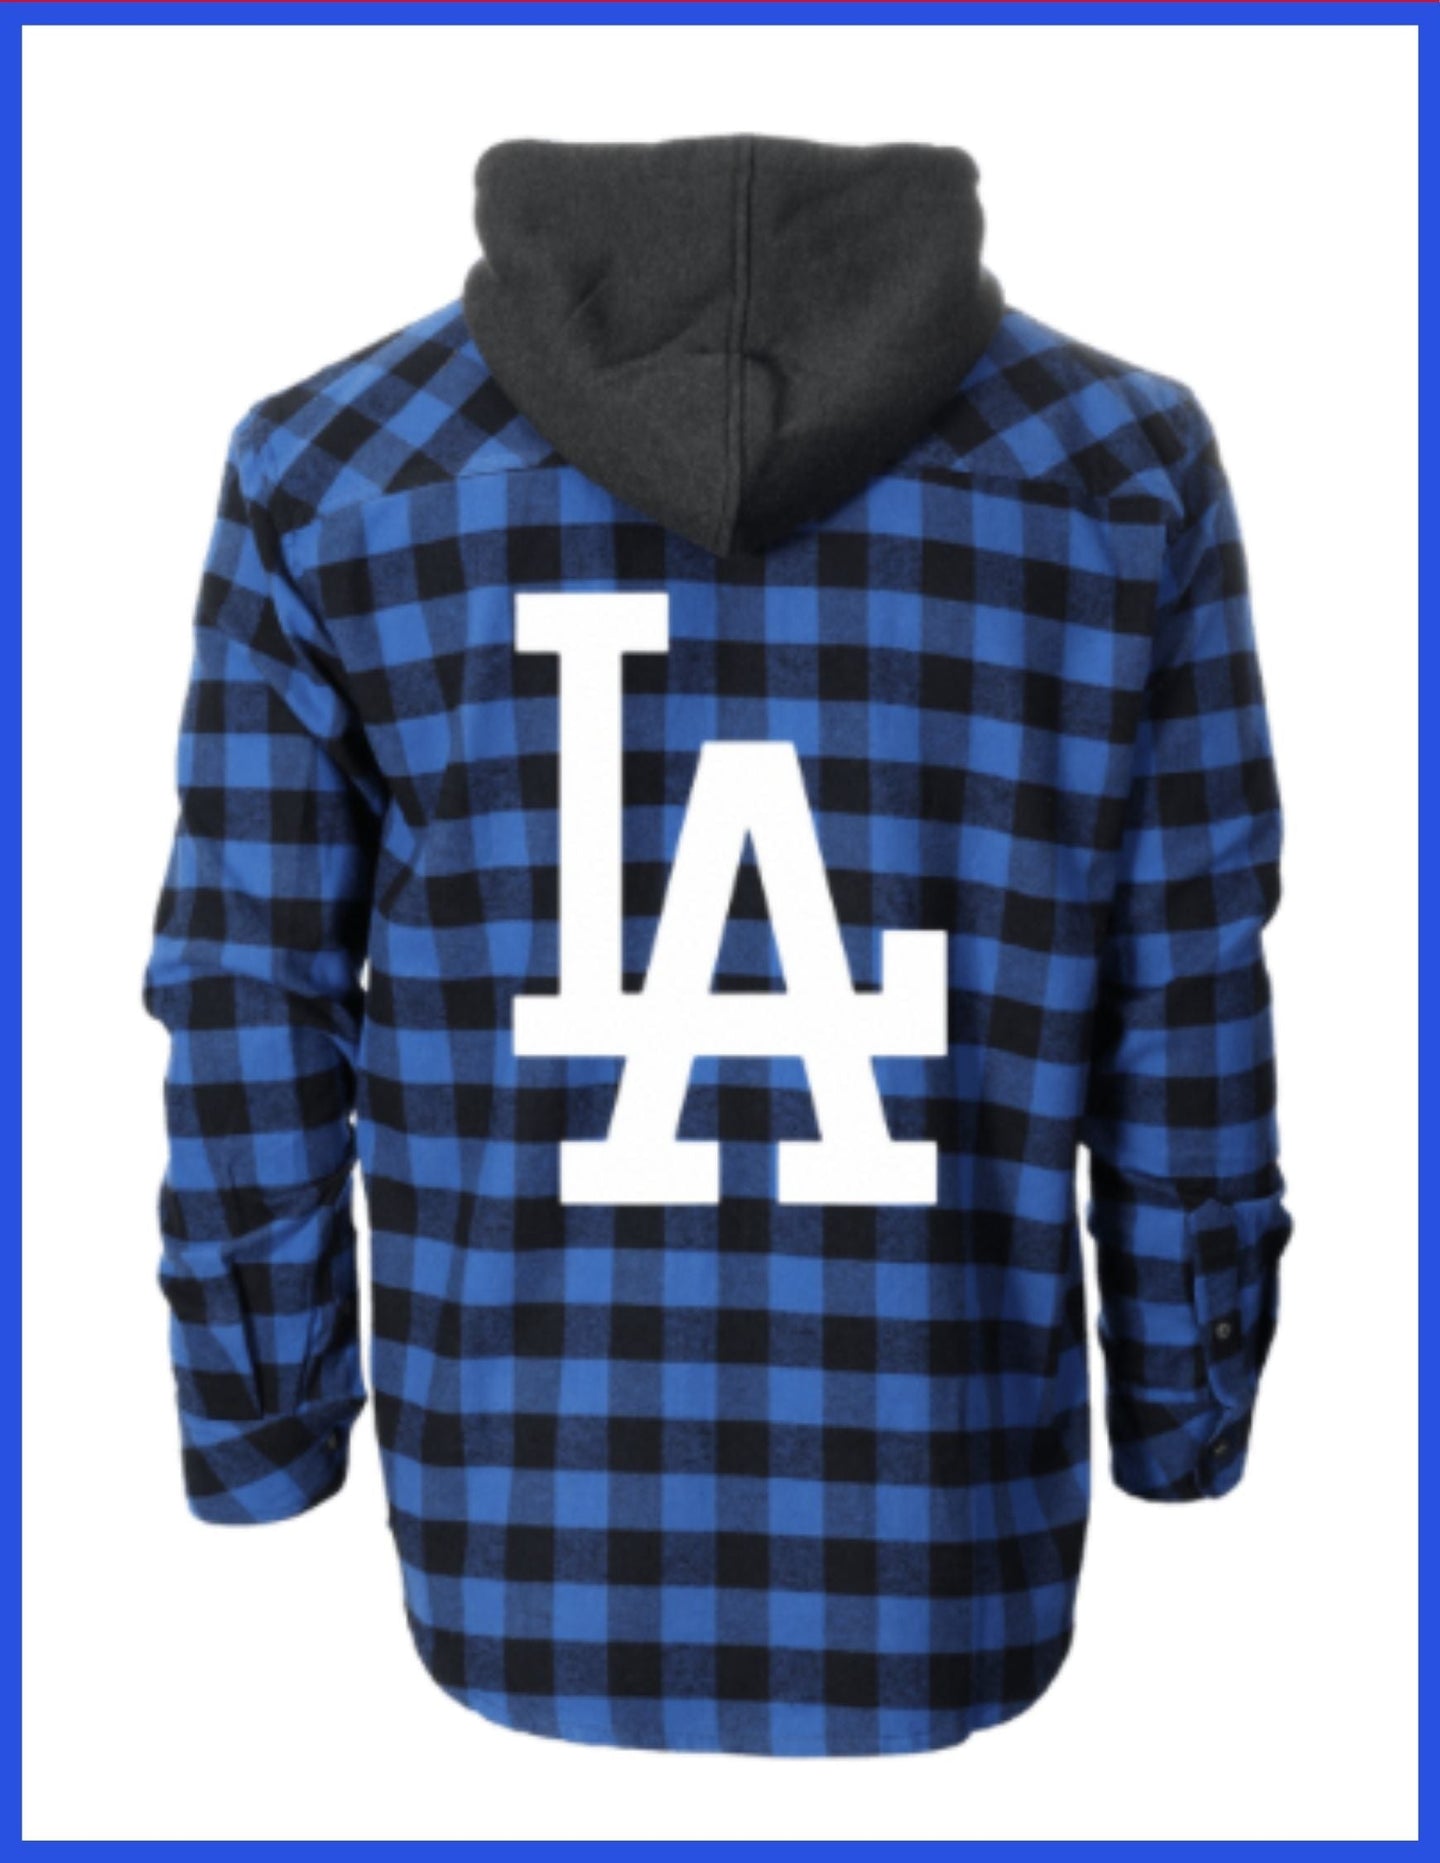 Men's L.A Logo Flannel Shirts Checkered Style Light Weight with